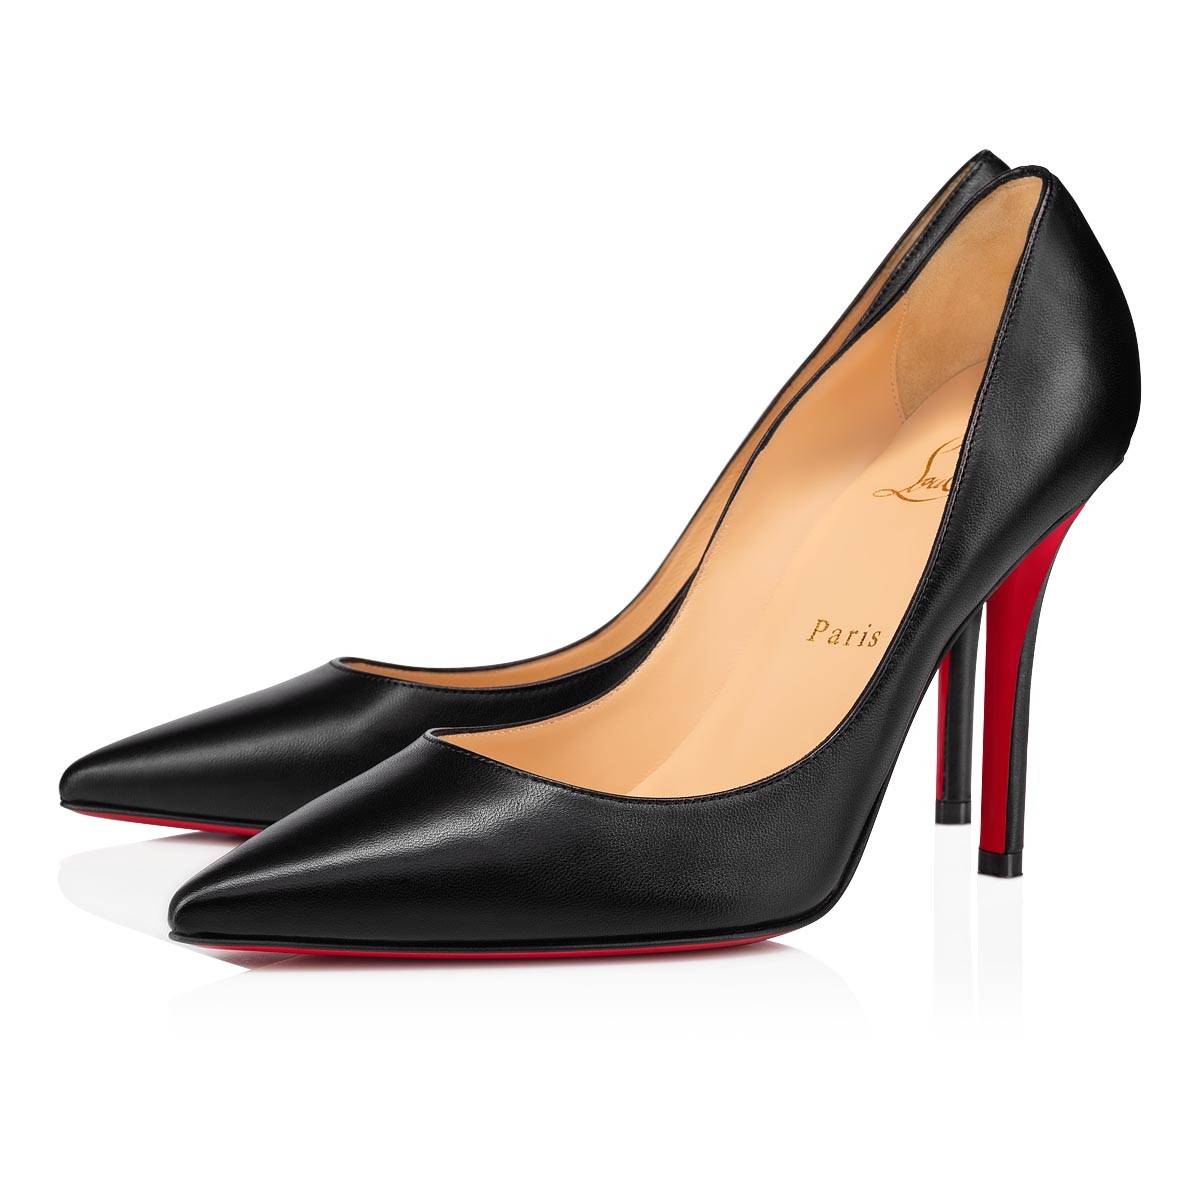 Apostrophy Black Nappa Leather 100 mm Pumps